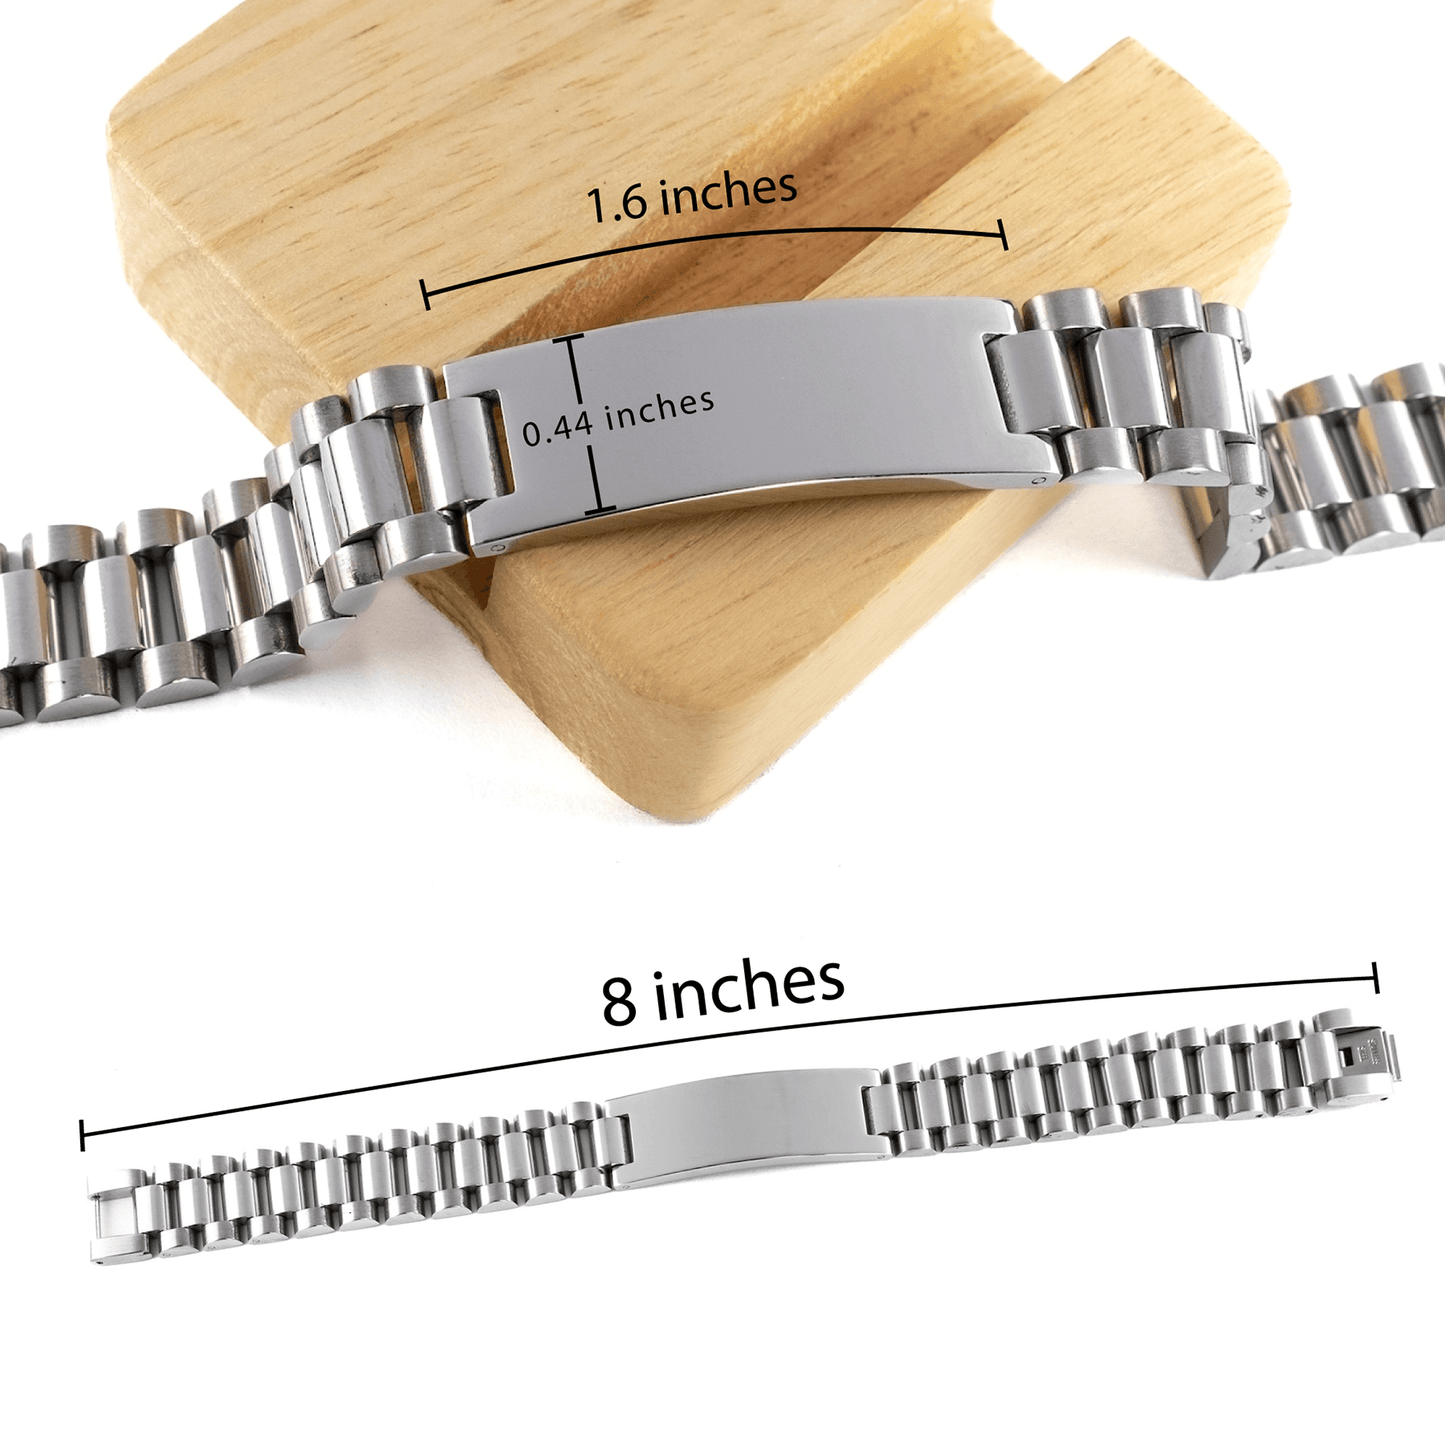 Network Administrator Ladder Stainless Steel Engraved Bracelet - Thanks for being who you are - Birthday Christmas Jewelry Gifts Coworkers Colleague Boss - Mallard Moon Gift Shop